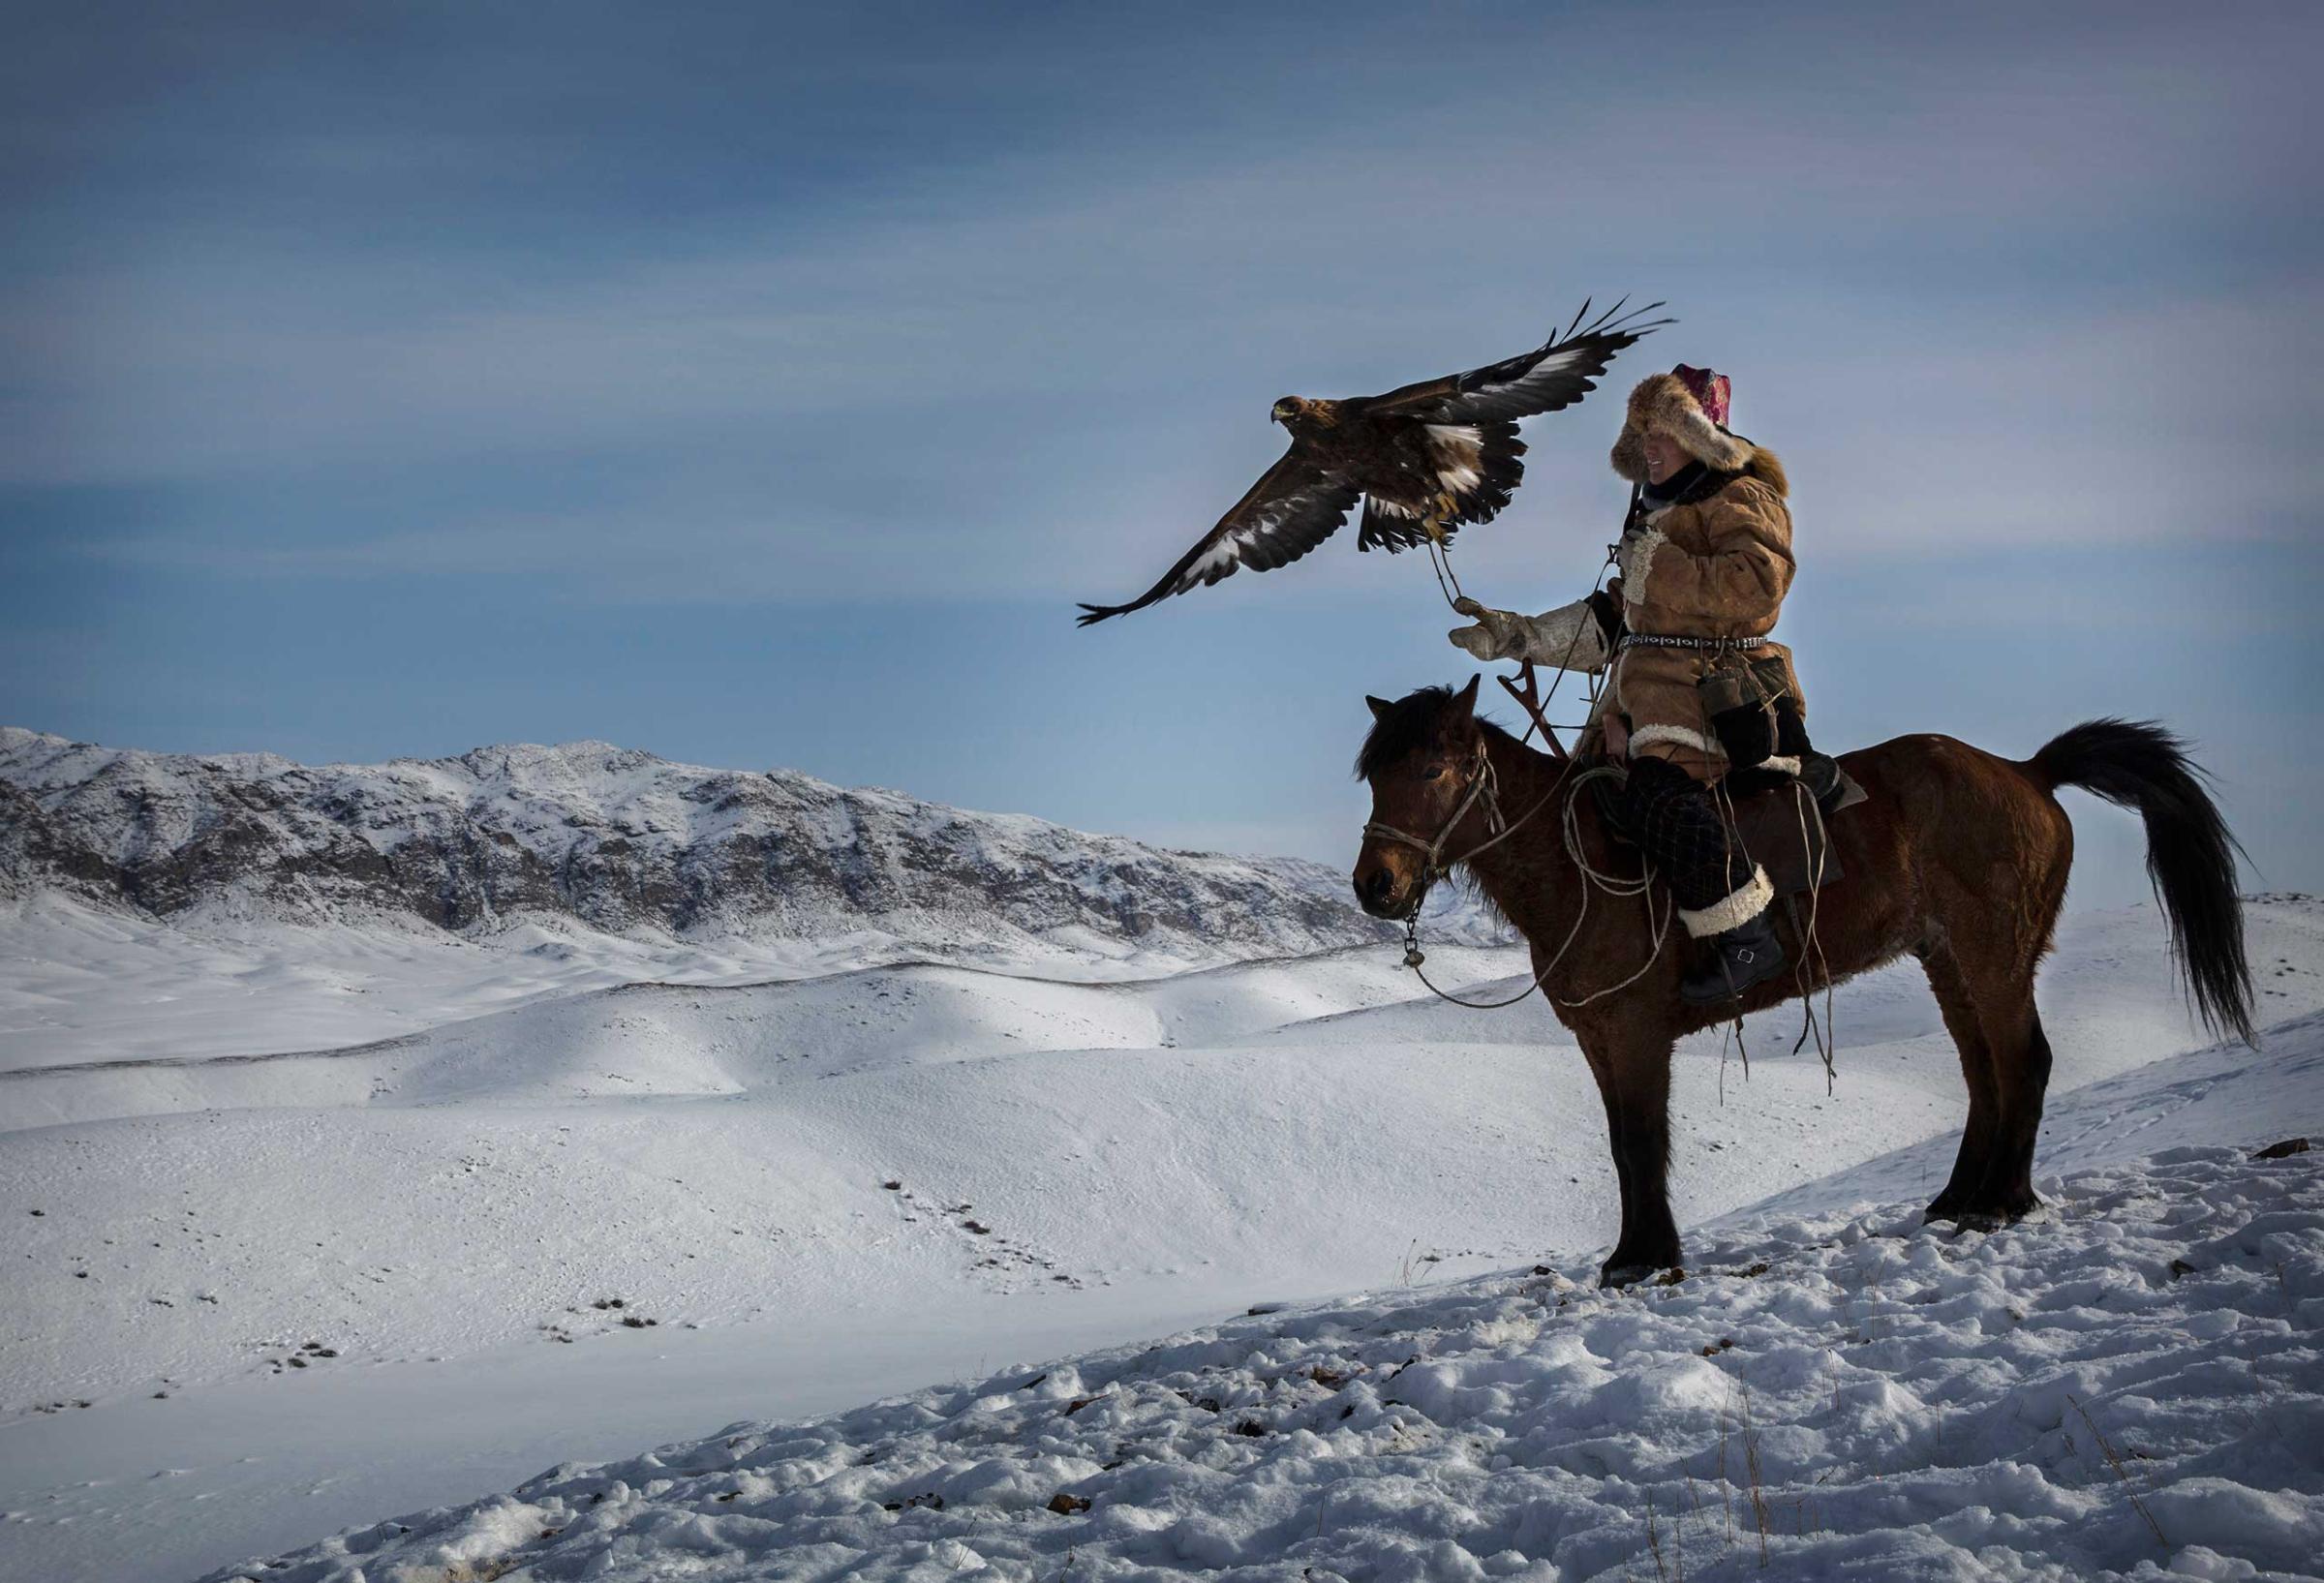 A Chinese Kazakh eagle hunter releases his eagle during a local competition in the mountains of Qinghe County, Xinjiang, northwestern China., Jan. 31, 2015.